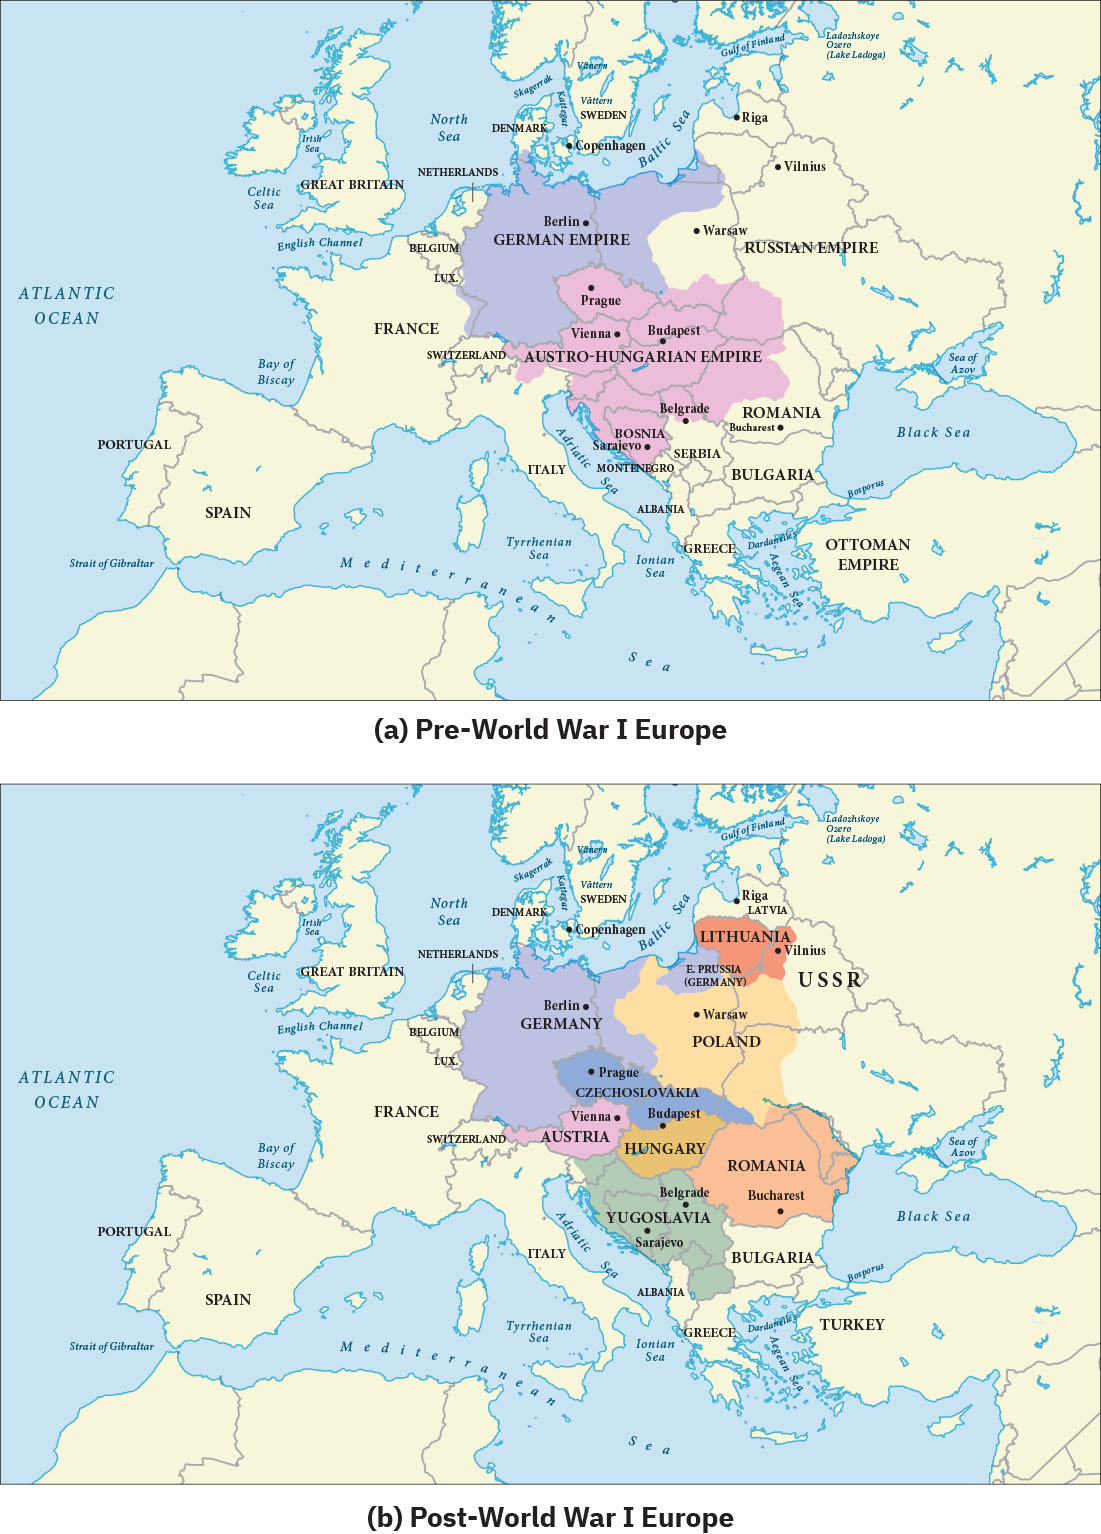 There are two maps that both show Europe, North Africa, and Western Asia. Map (a) is titled Pre-World War I Europe. The German Empire and Austro-Hungarian Empire cover most of central Europe. The Russian Empire and Ottoman Empire are also included on the map. Map (b) is titled Post-World War I Europe. What was the German Empire is now Germany and part of Poland. What was the Astro-Hungarian Empire is now Czechoslovakia, Austria, Hungary, part of Poland, part of Romania, and part of Yugoslavia. What was the Russian Empire is now the USSR, Lithuania, part of Poland, and part of Romania. What was the Ottoman Empire is now Turkey.